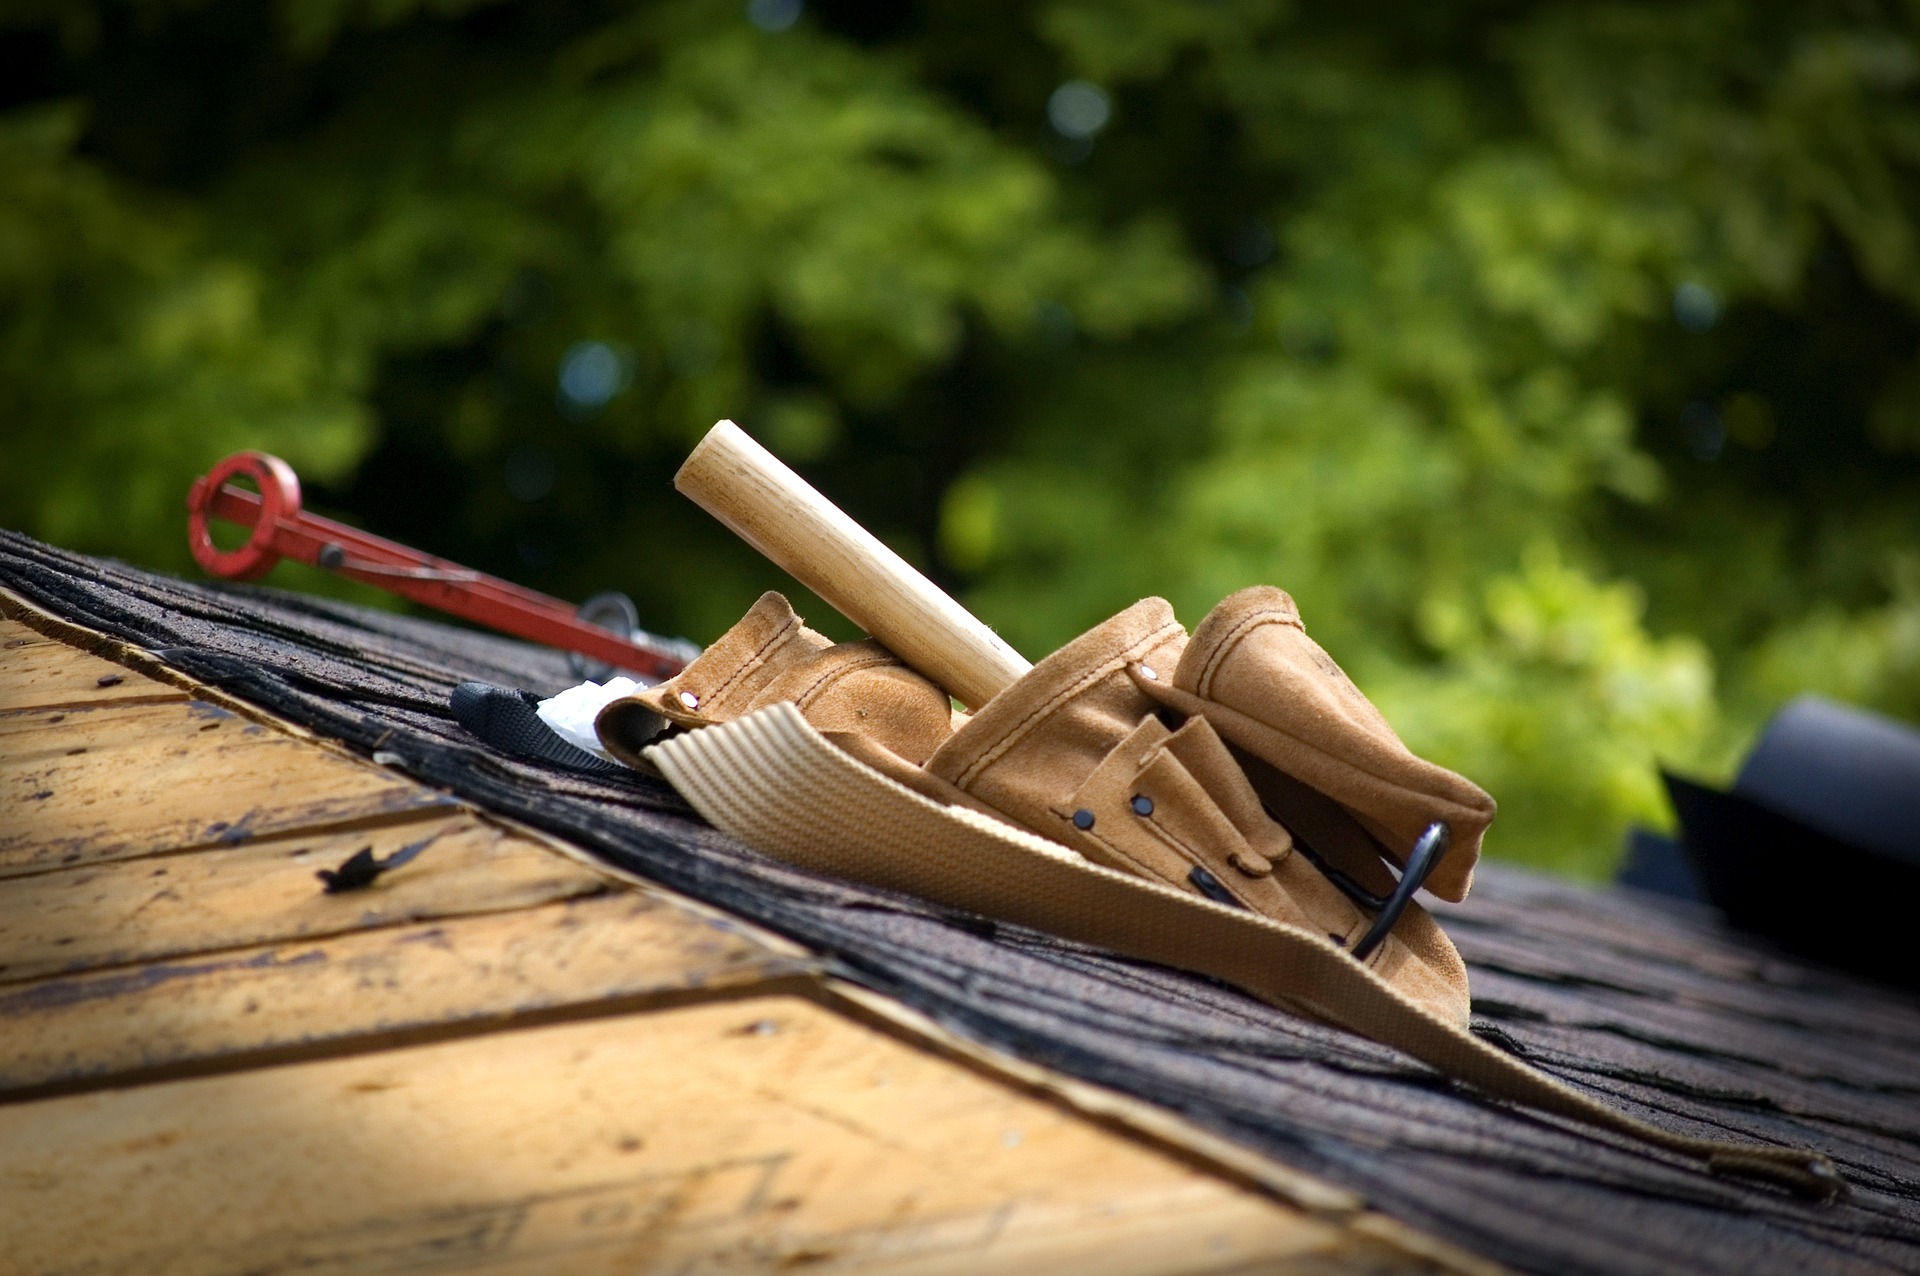 How to Pick a Good Roofer - Negotiate Roof Replacement Cost